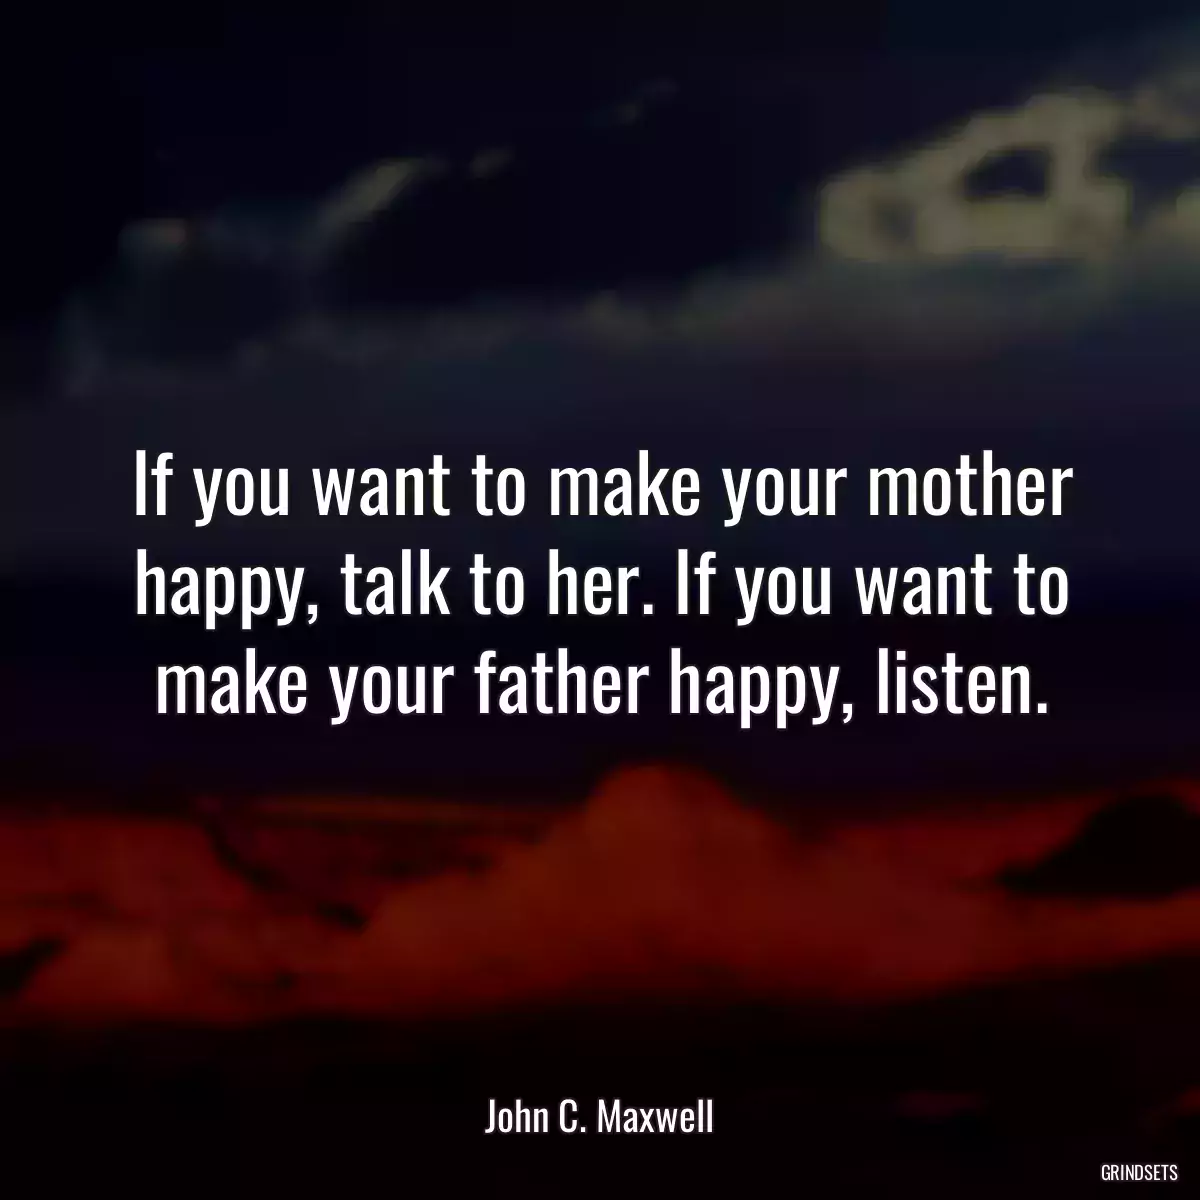 If you want to make your mother happy, talk to her. If you want to make your father happy, listen.